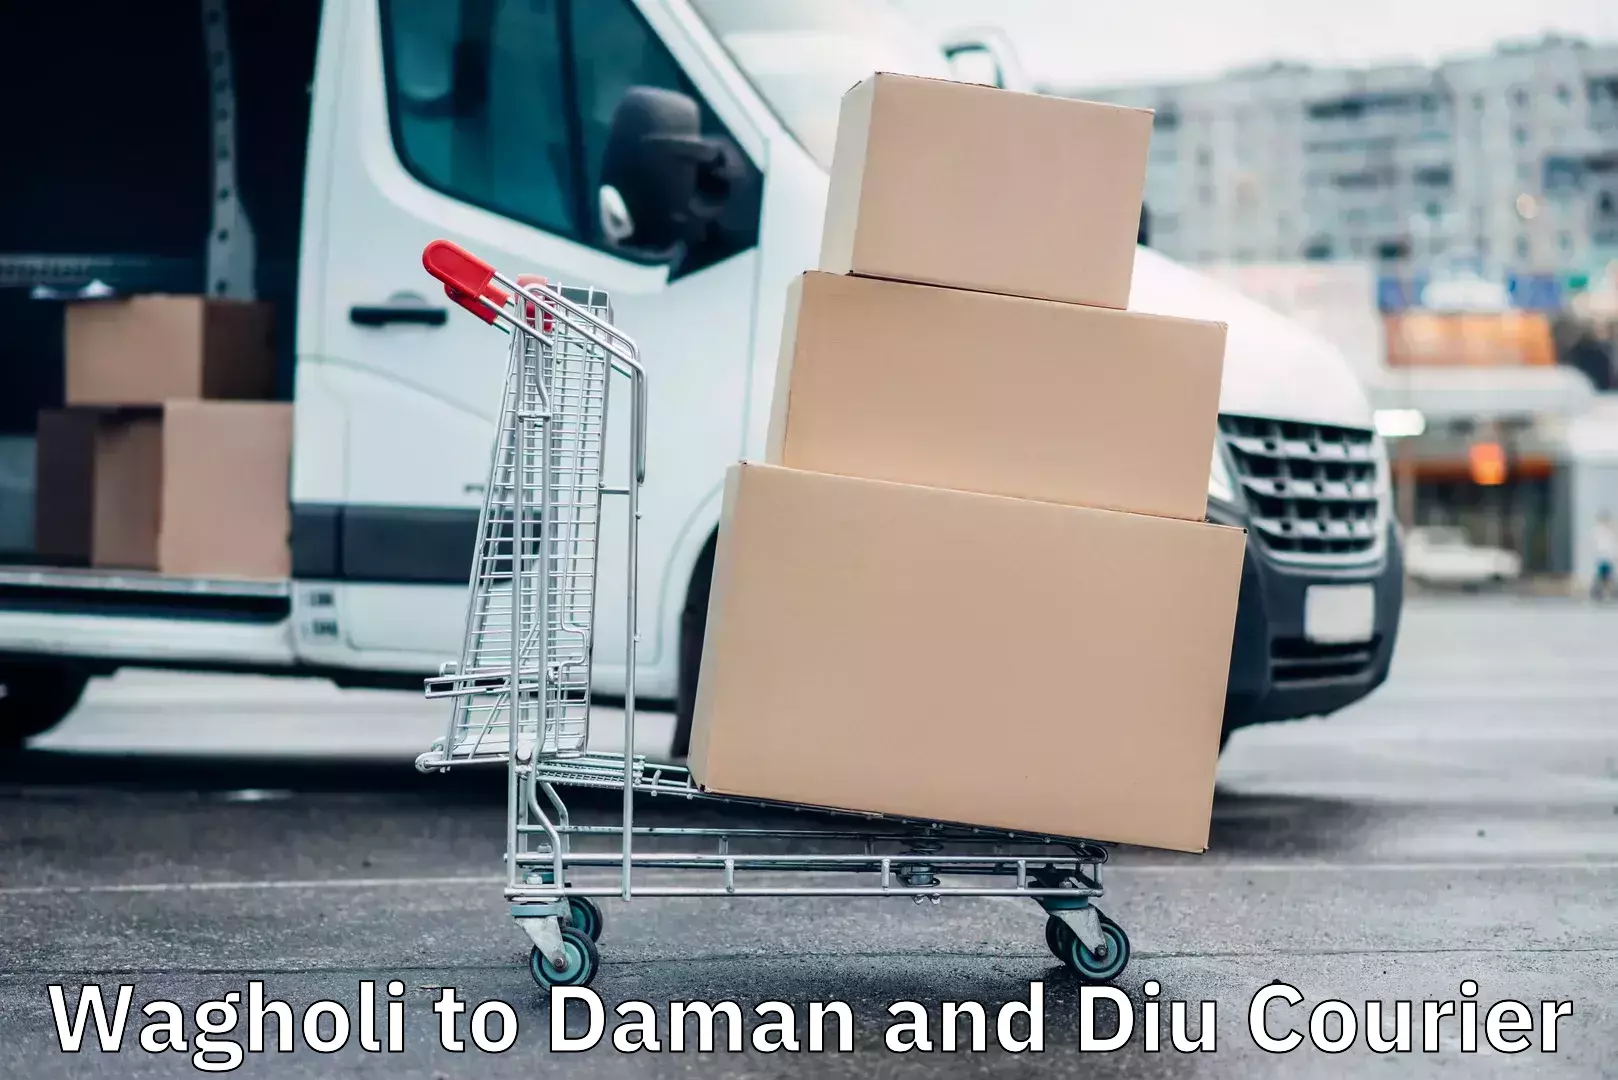 Modern courier technology Wagholi to Daman and Diu